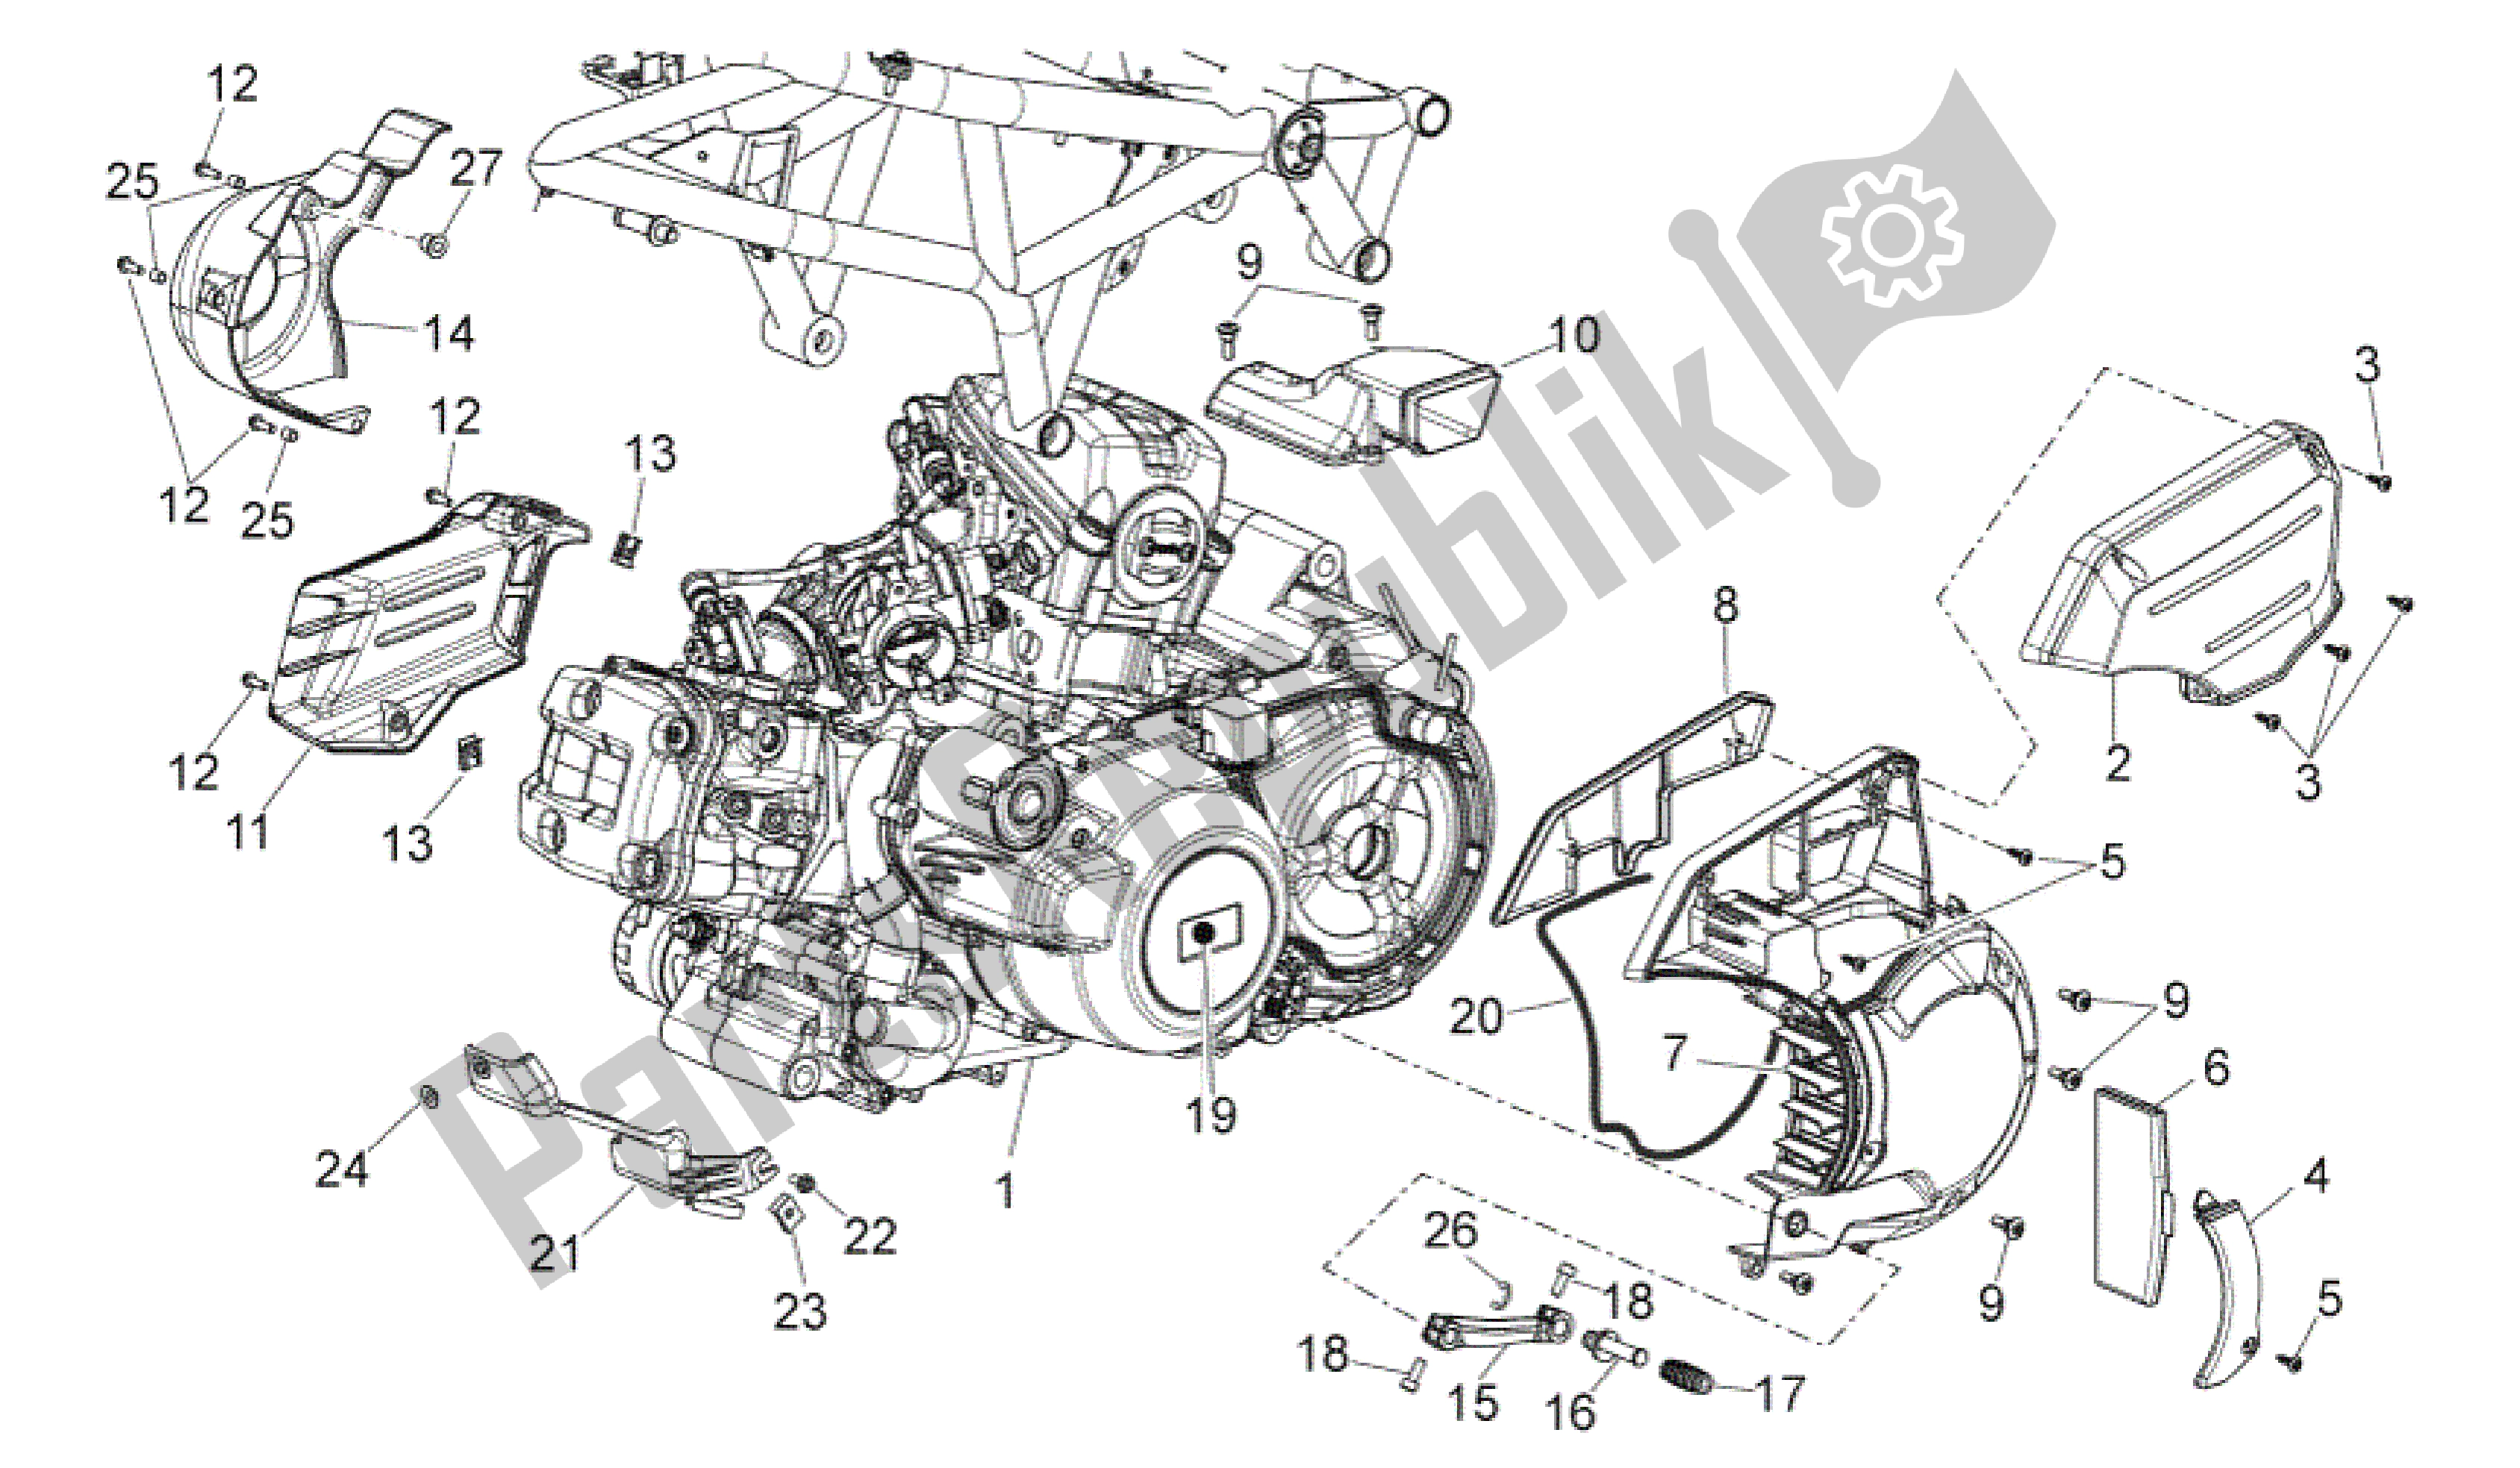 All parts for the Engine of the Aprilia Mana 850 2009 - 2011